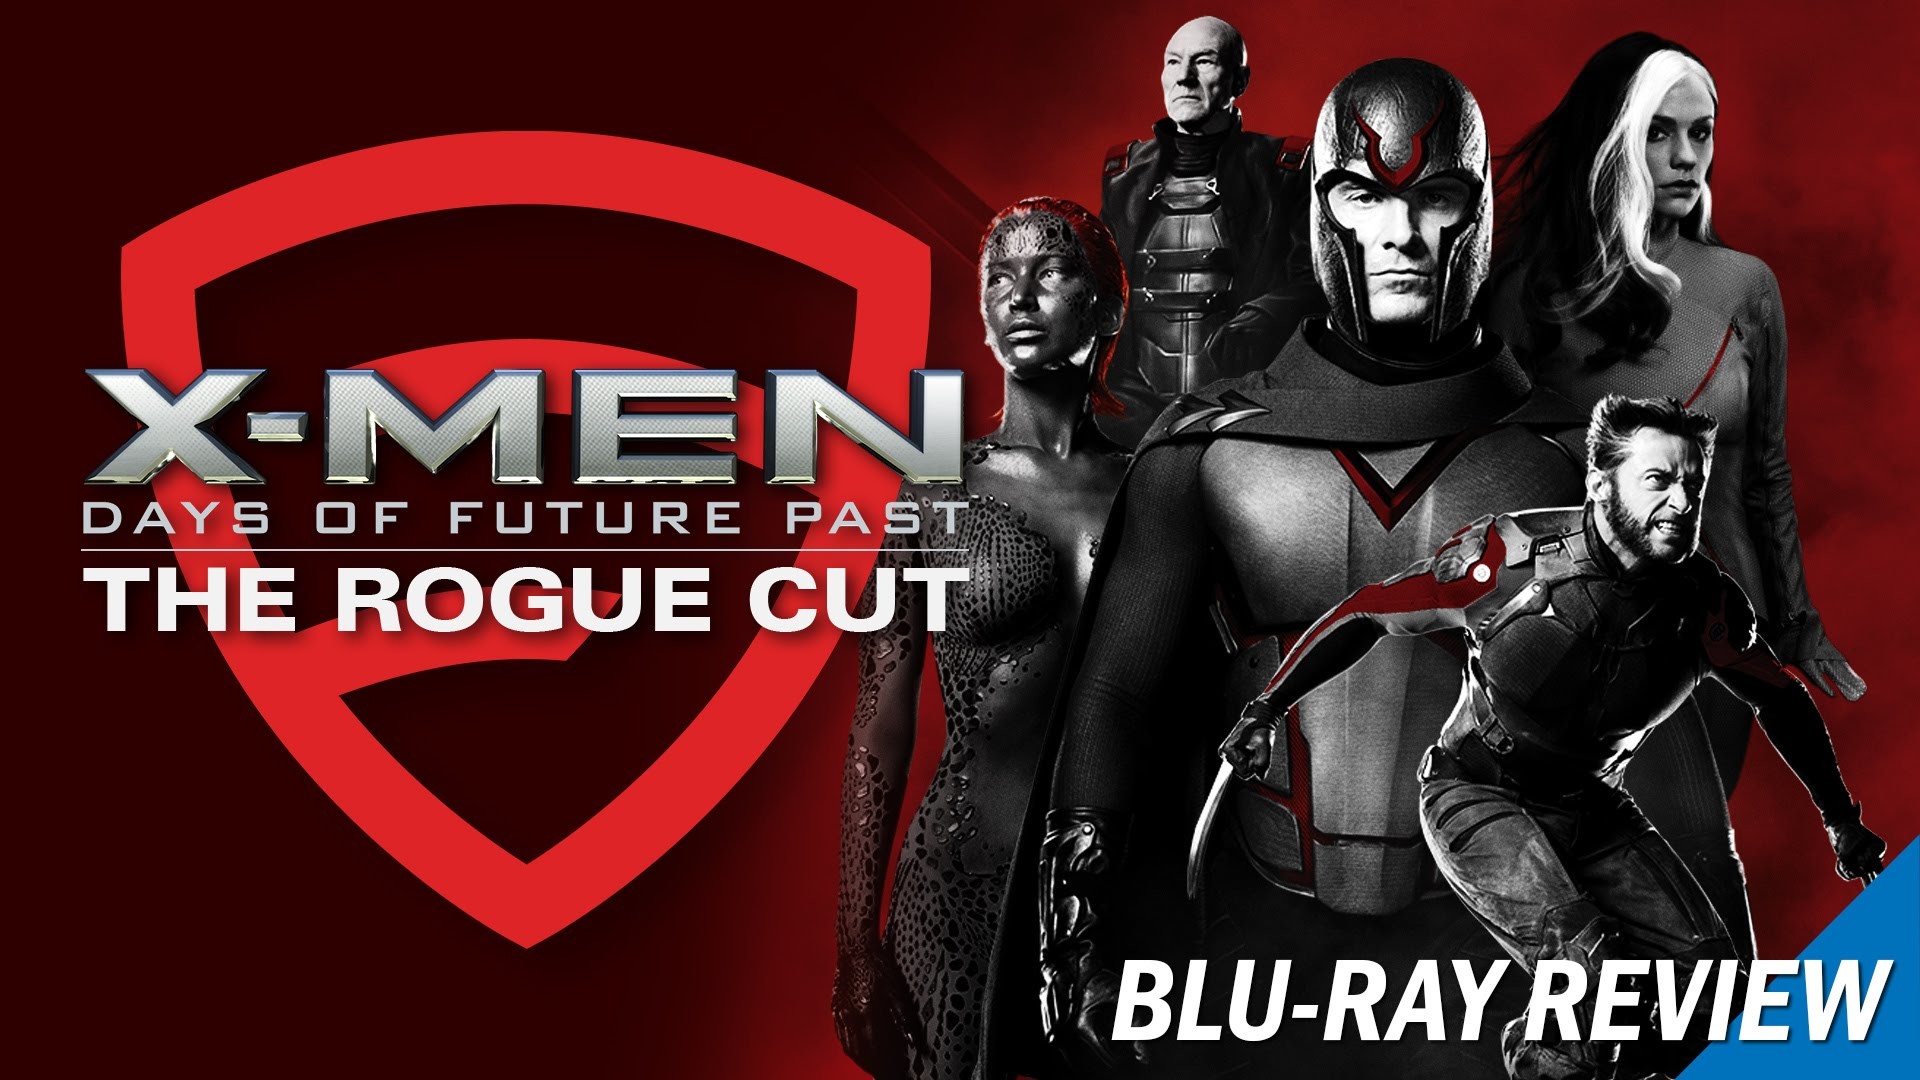 1920x1080 X-Men: Days of Future Past - The Rogue Cut (Blu-ray Review)